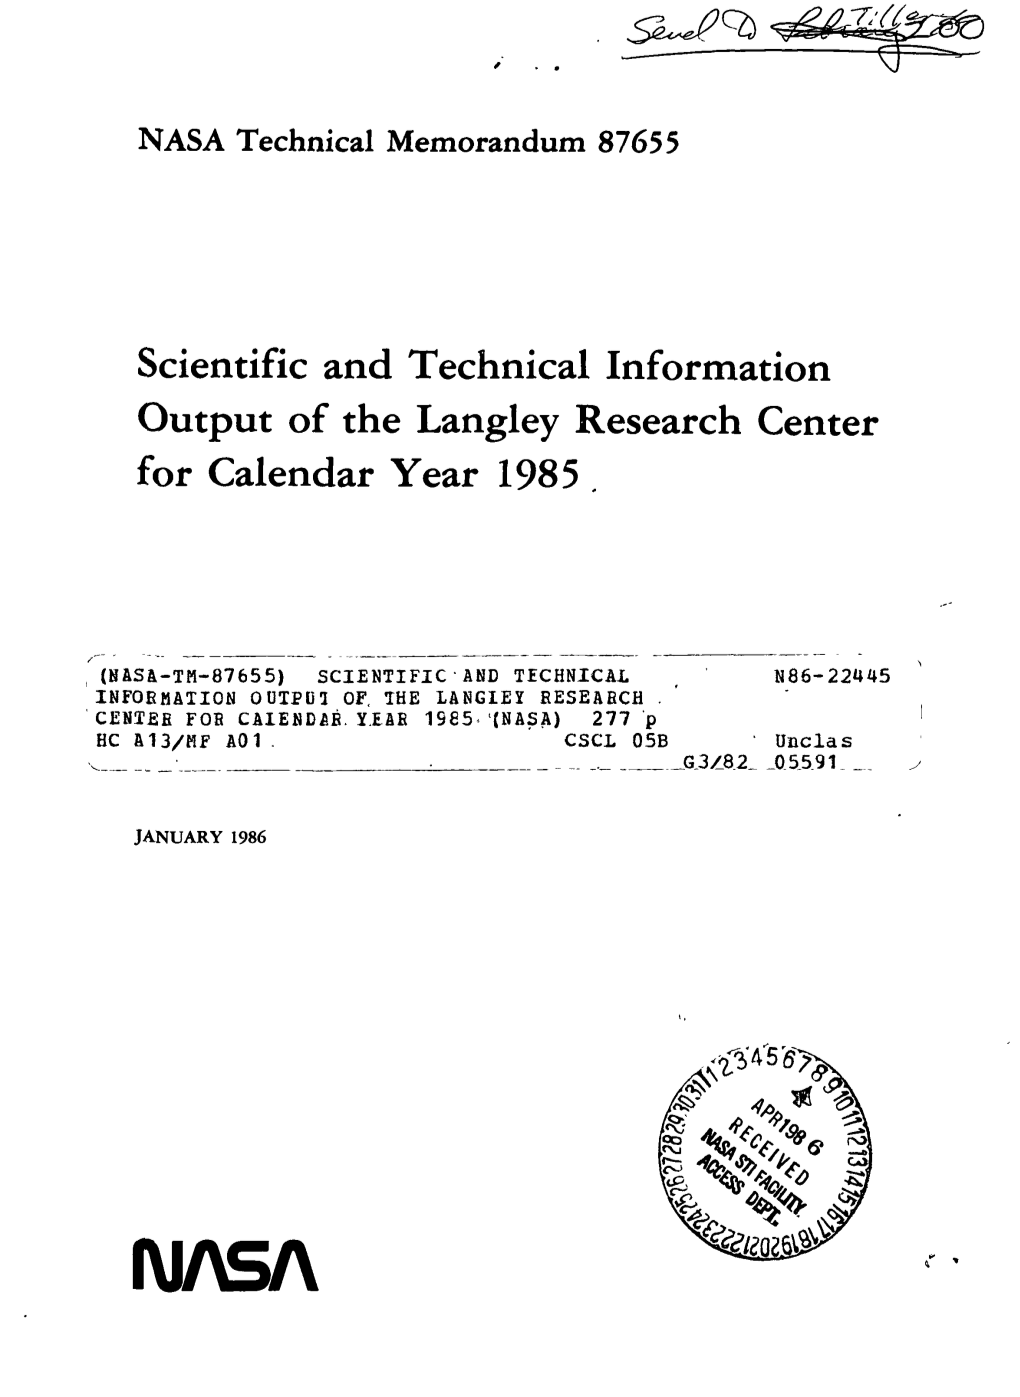 Scientific and Technical Information Output of the Langley Research Center for Calendar Year 1985